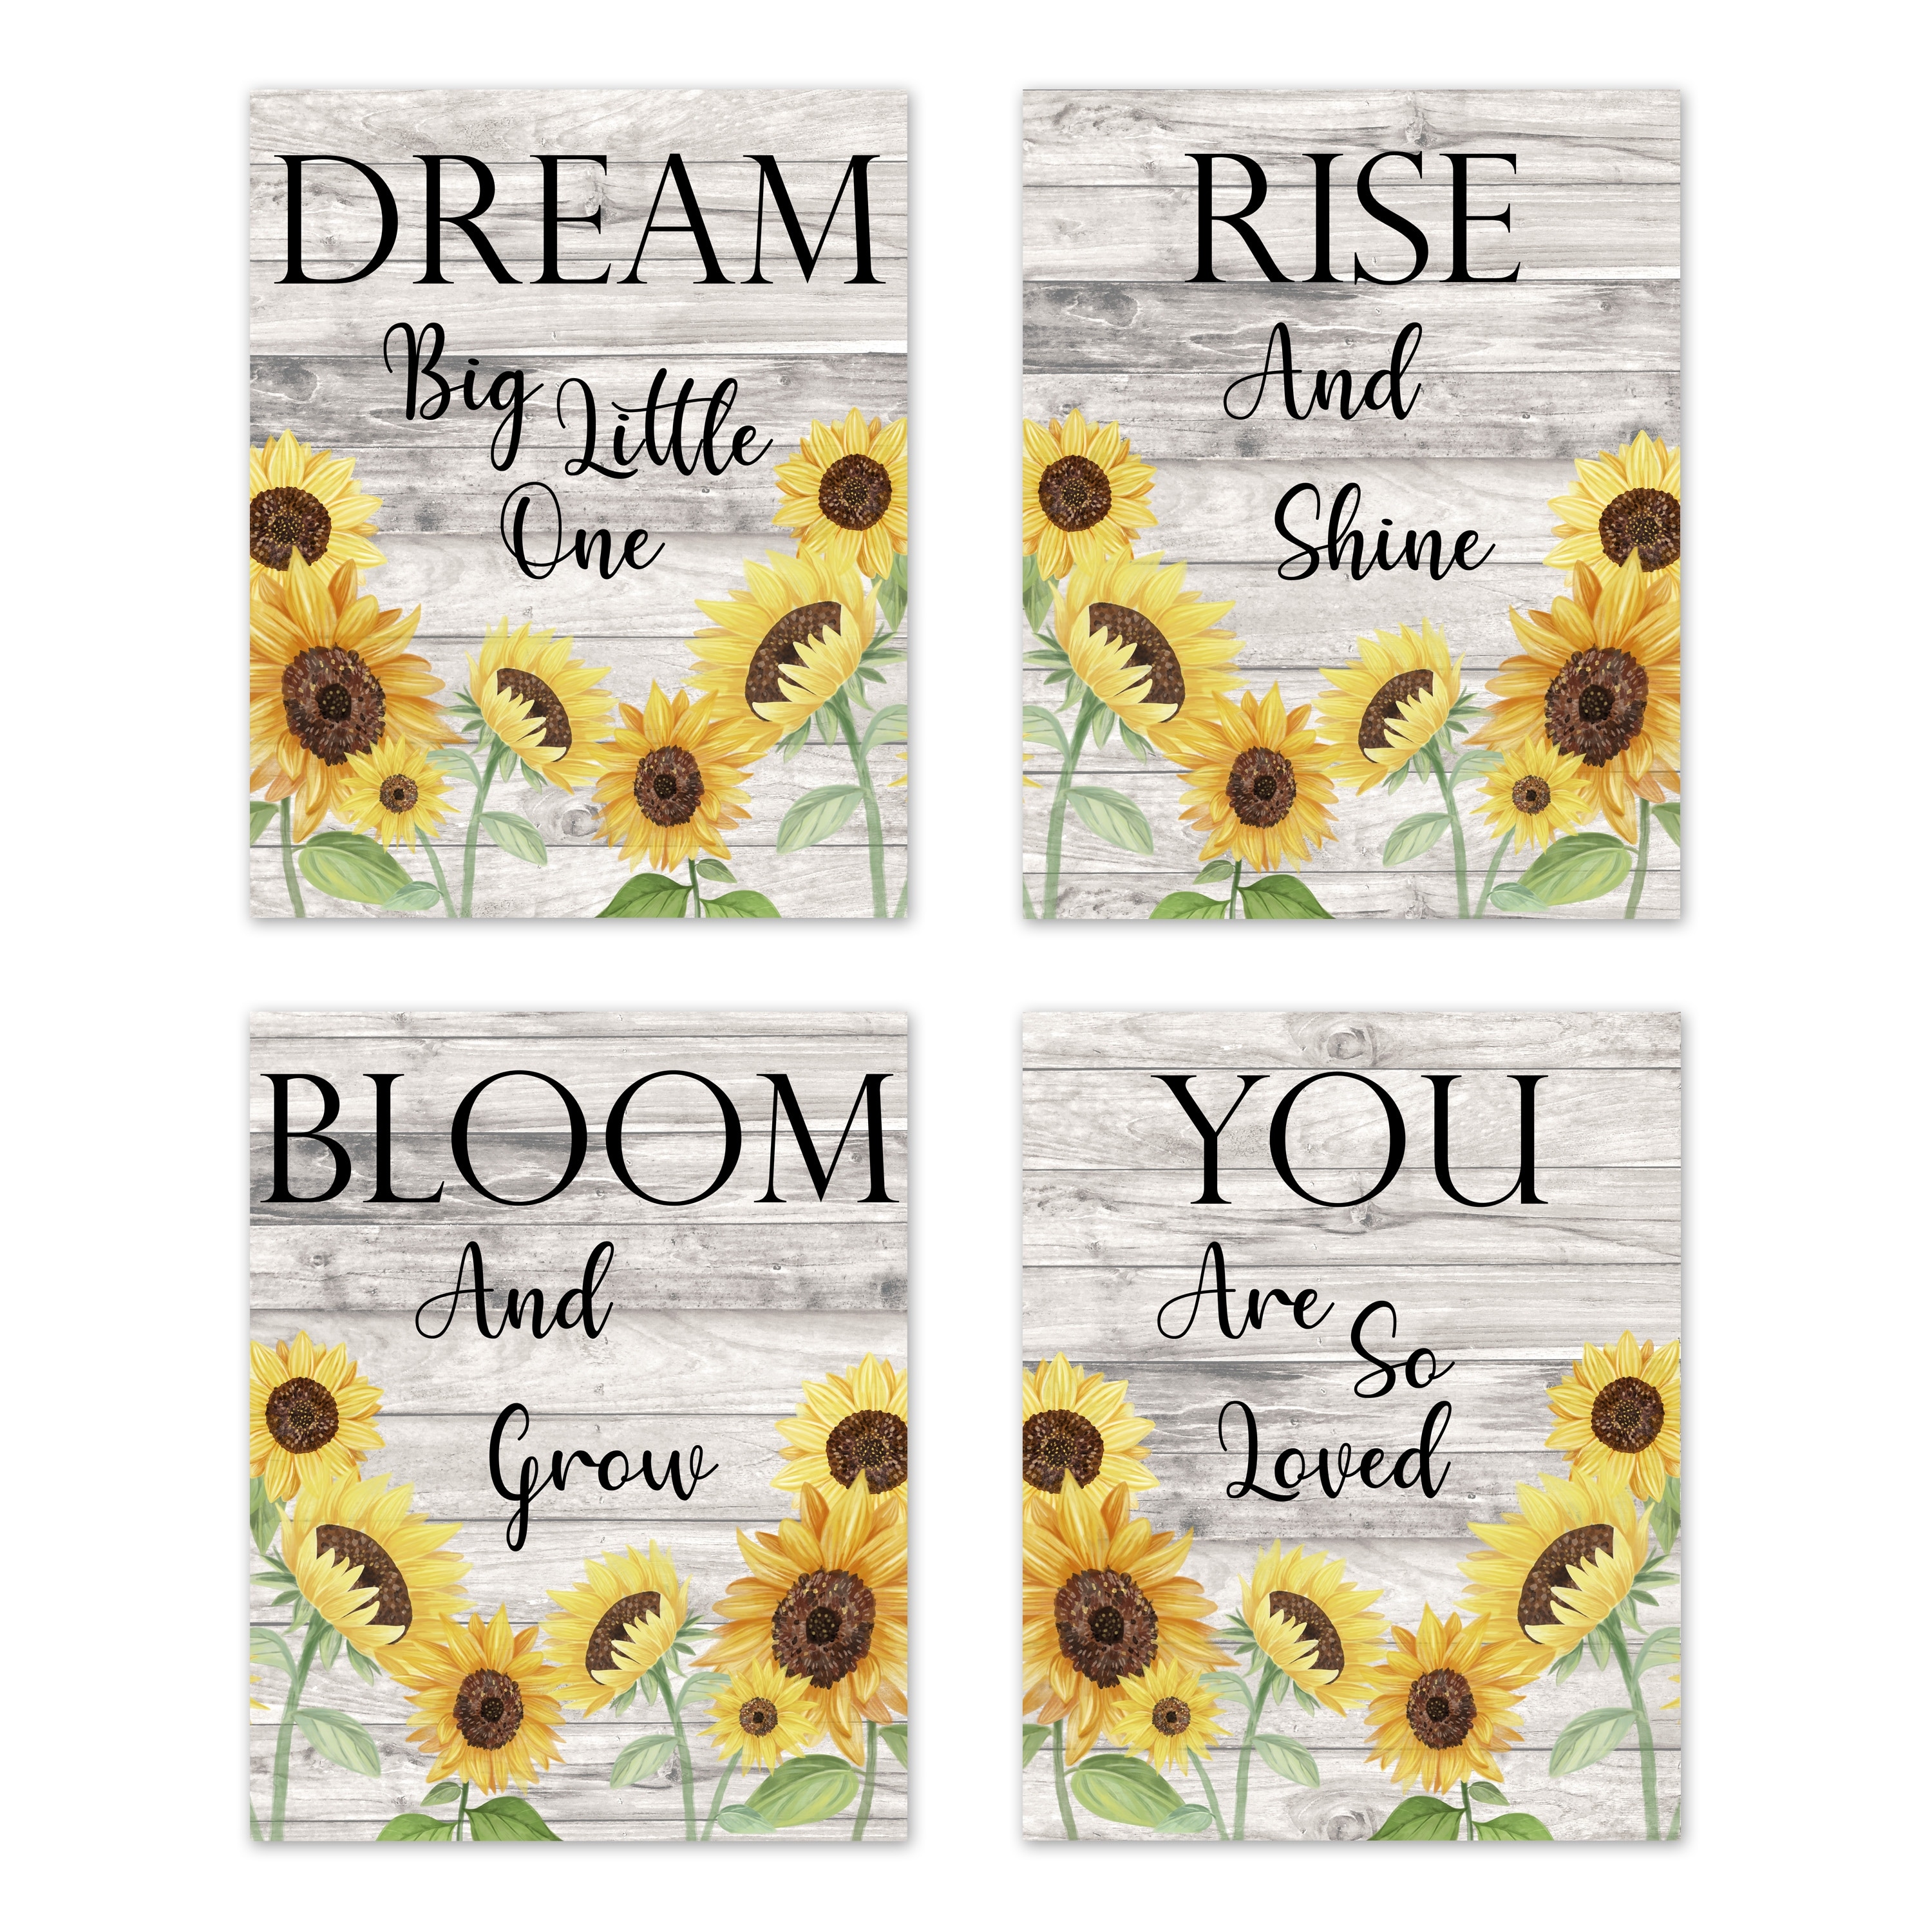 https://ak1.ostkcdn.com/images/products/is/images/direct/d0b6f4b75b39b9ab0fd34688ec1b04c3bdadc17c/Yellow-Boho-Floral-Sunflower-Wall-Decor-Art-Prints-%28Set-of-4%29---Farmhouse-Wood-Grain-Rustic-Watercolor-Flower-Vintage-Country.jpg